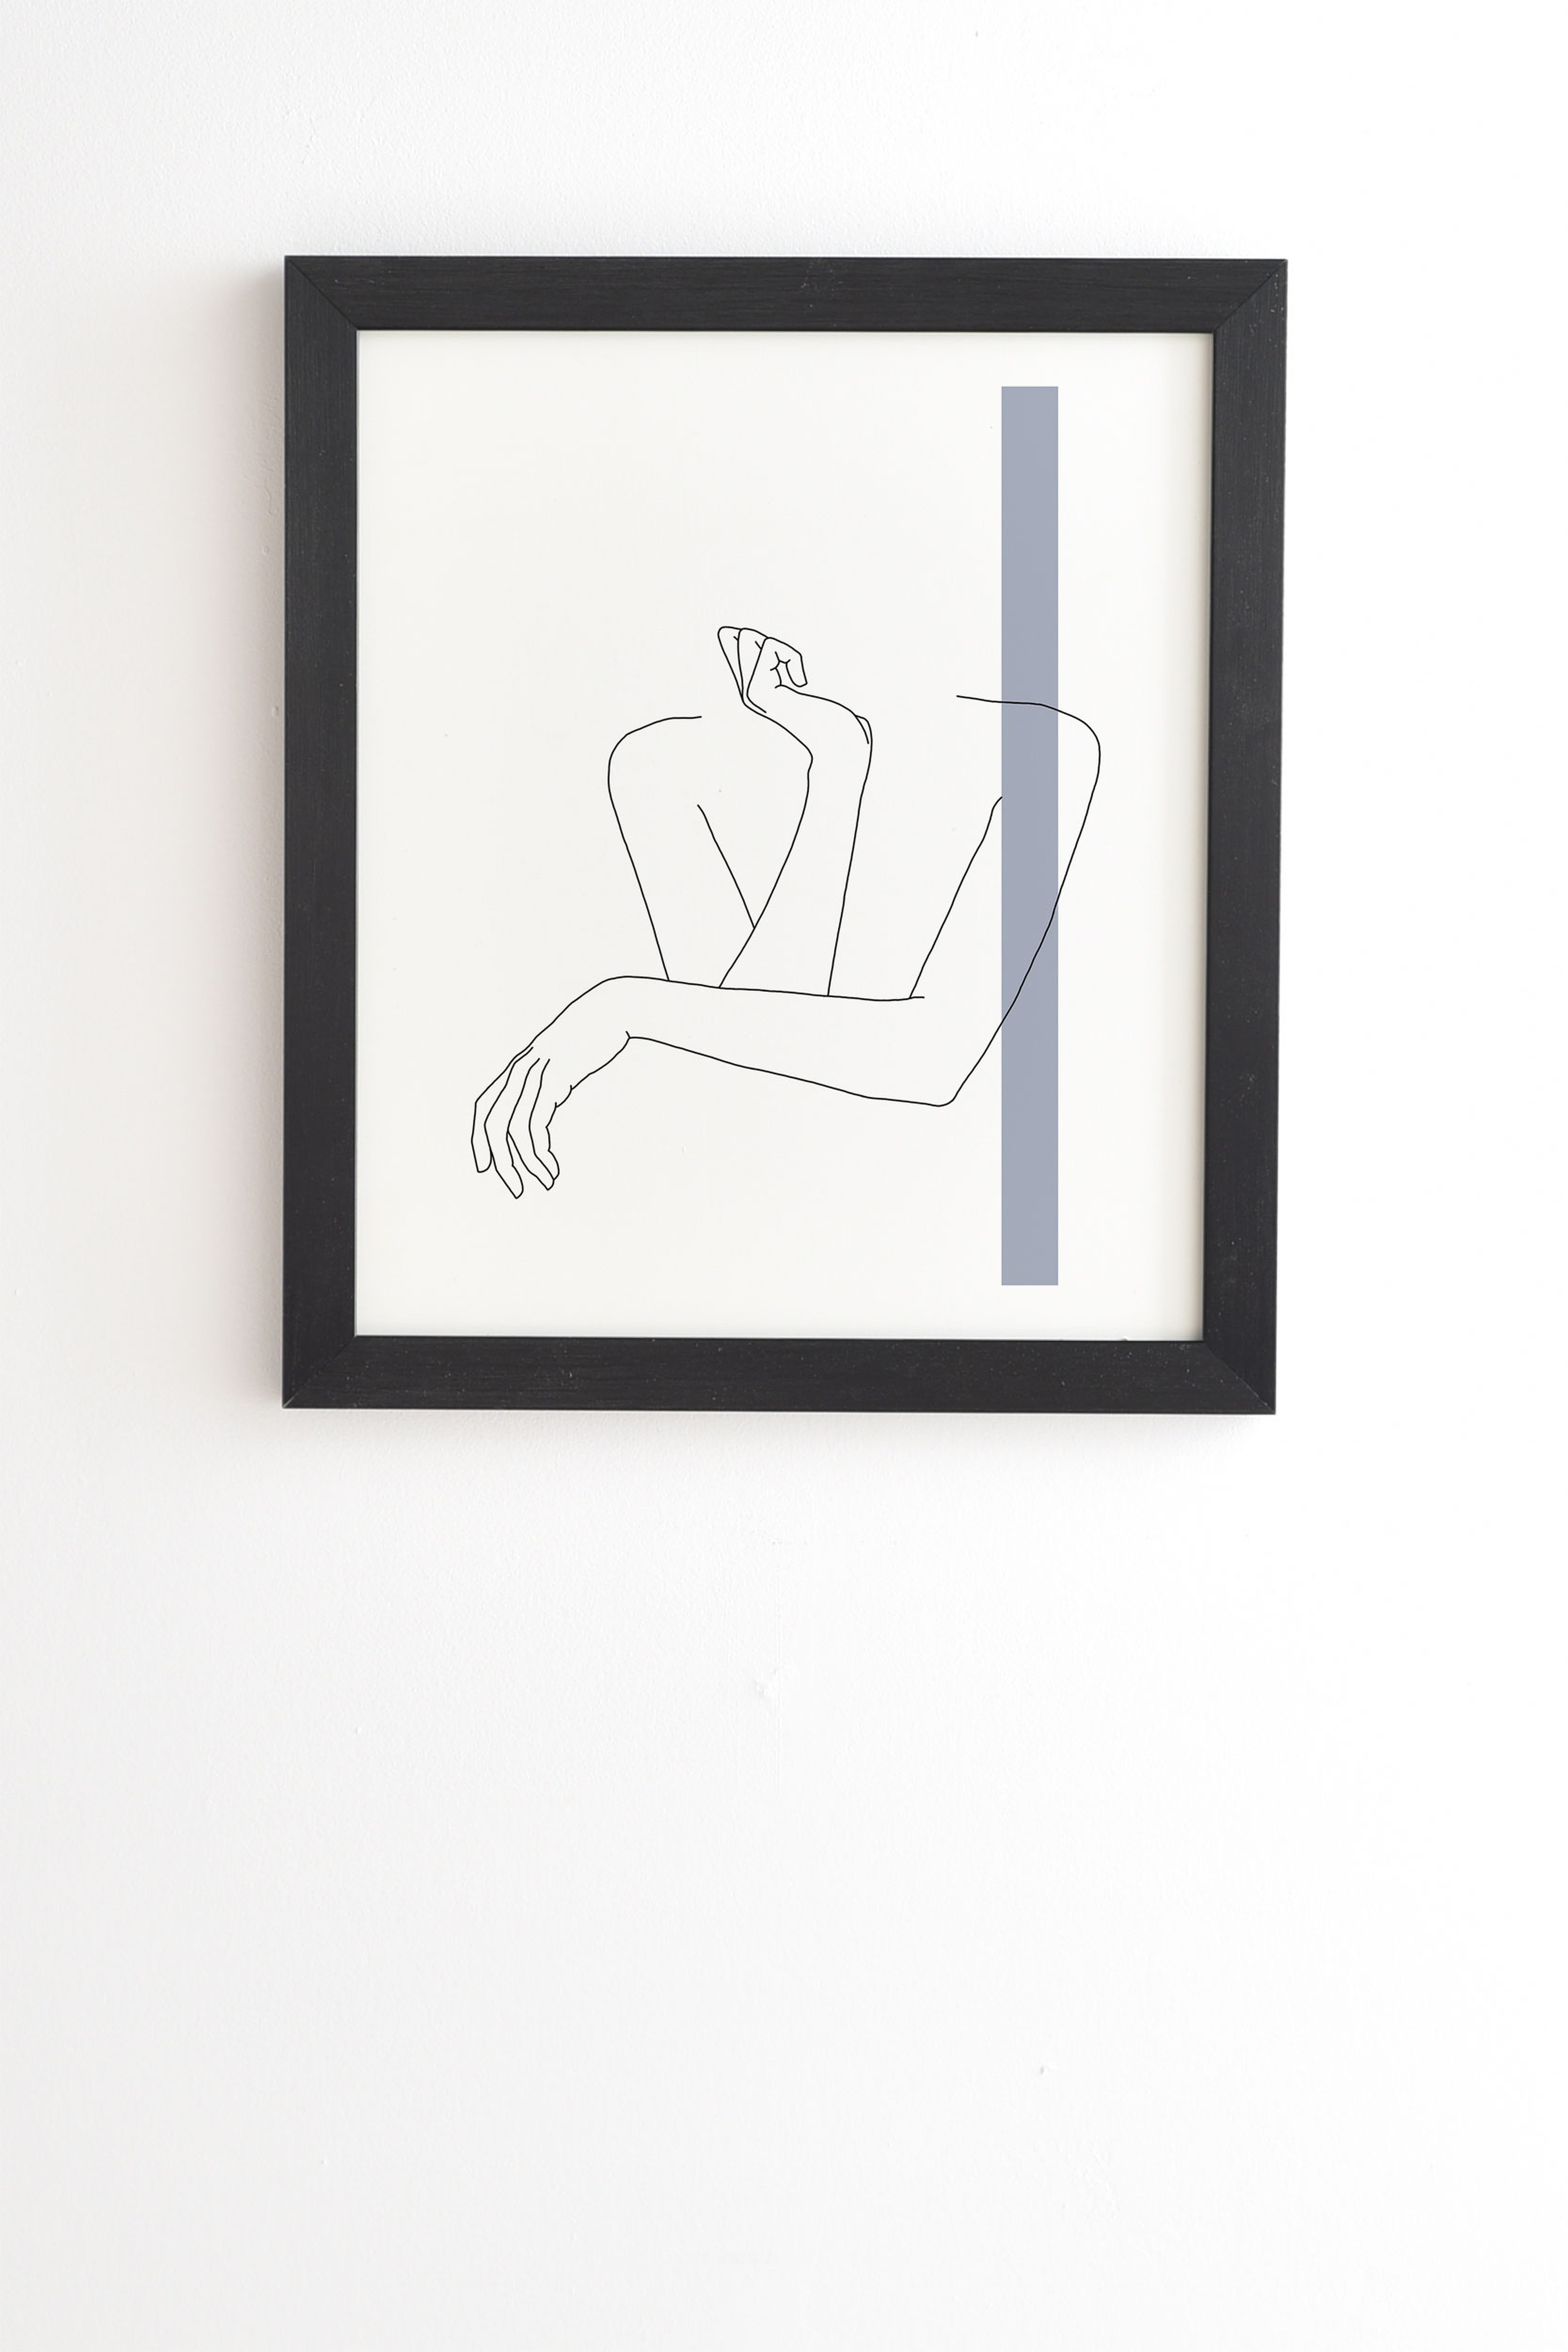 Crossed Arms Anna Stripe by The Colour Study - Framed Wall Art Basic Black 19" x 22.4" - Wander Print Co.